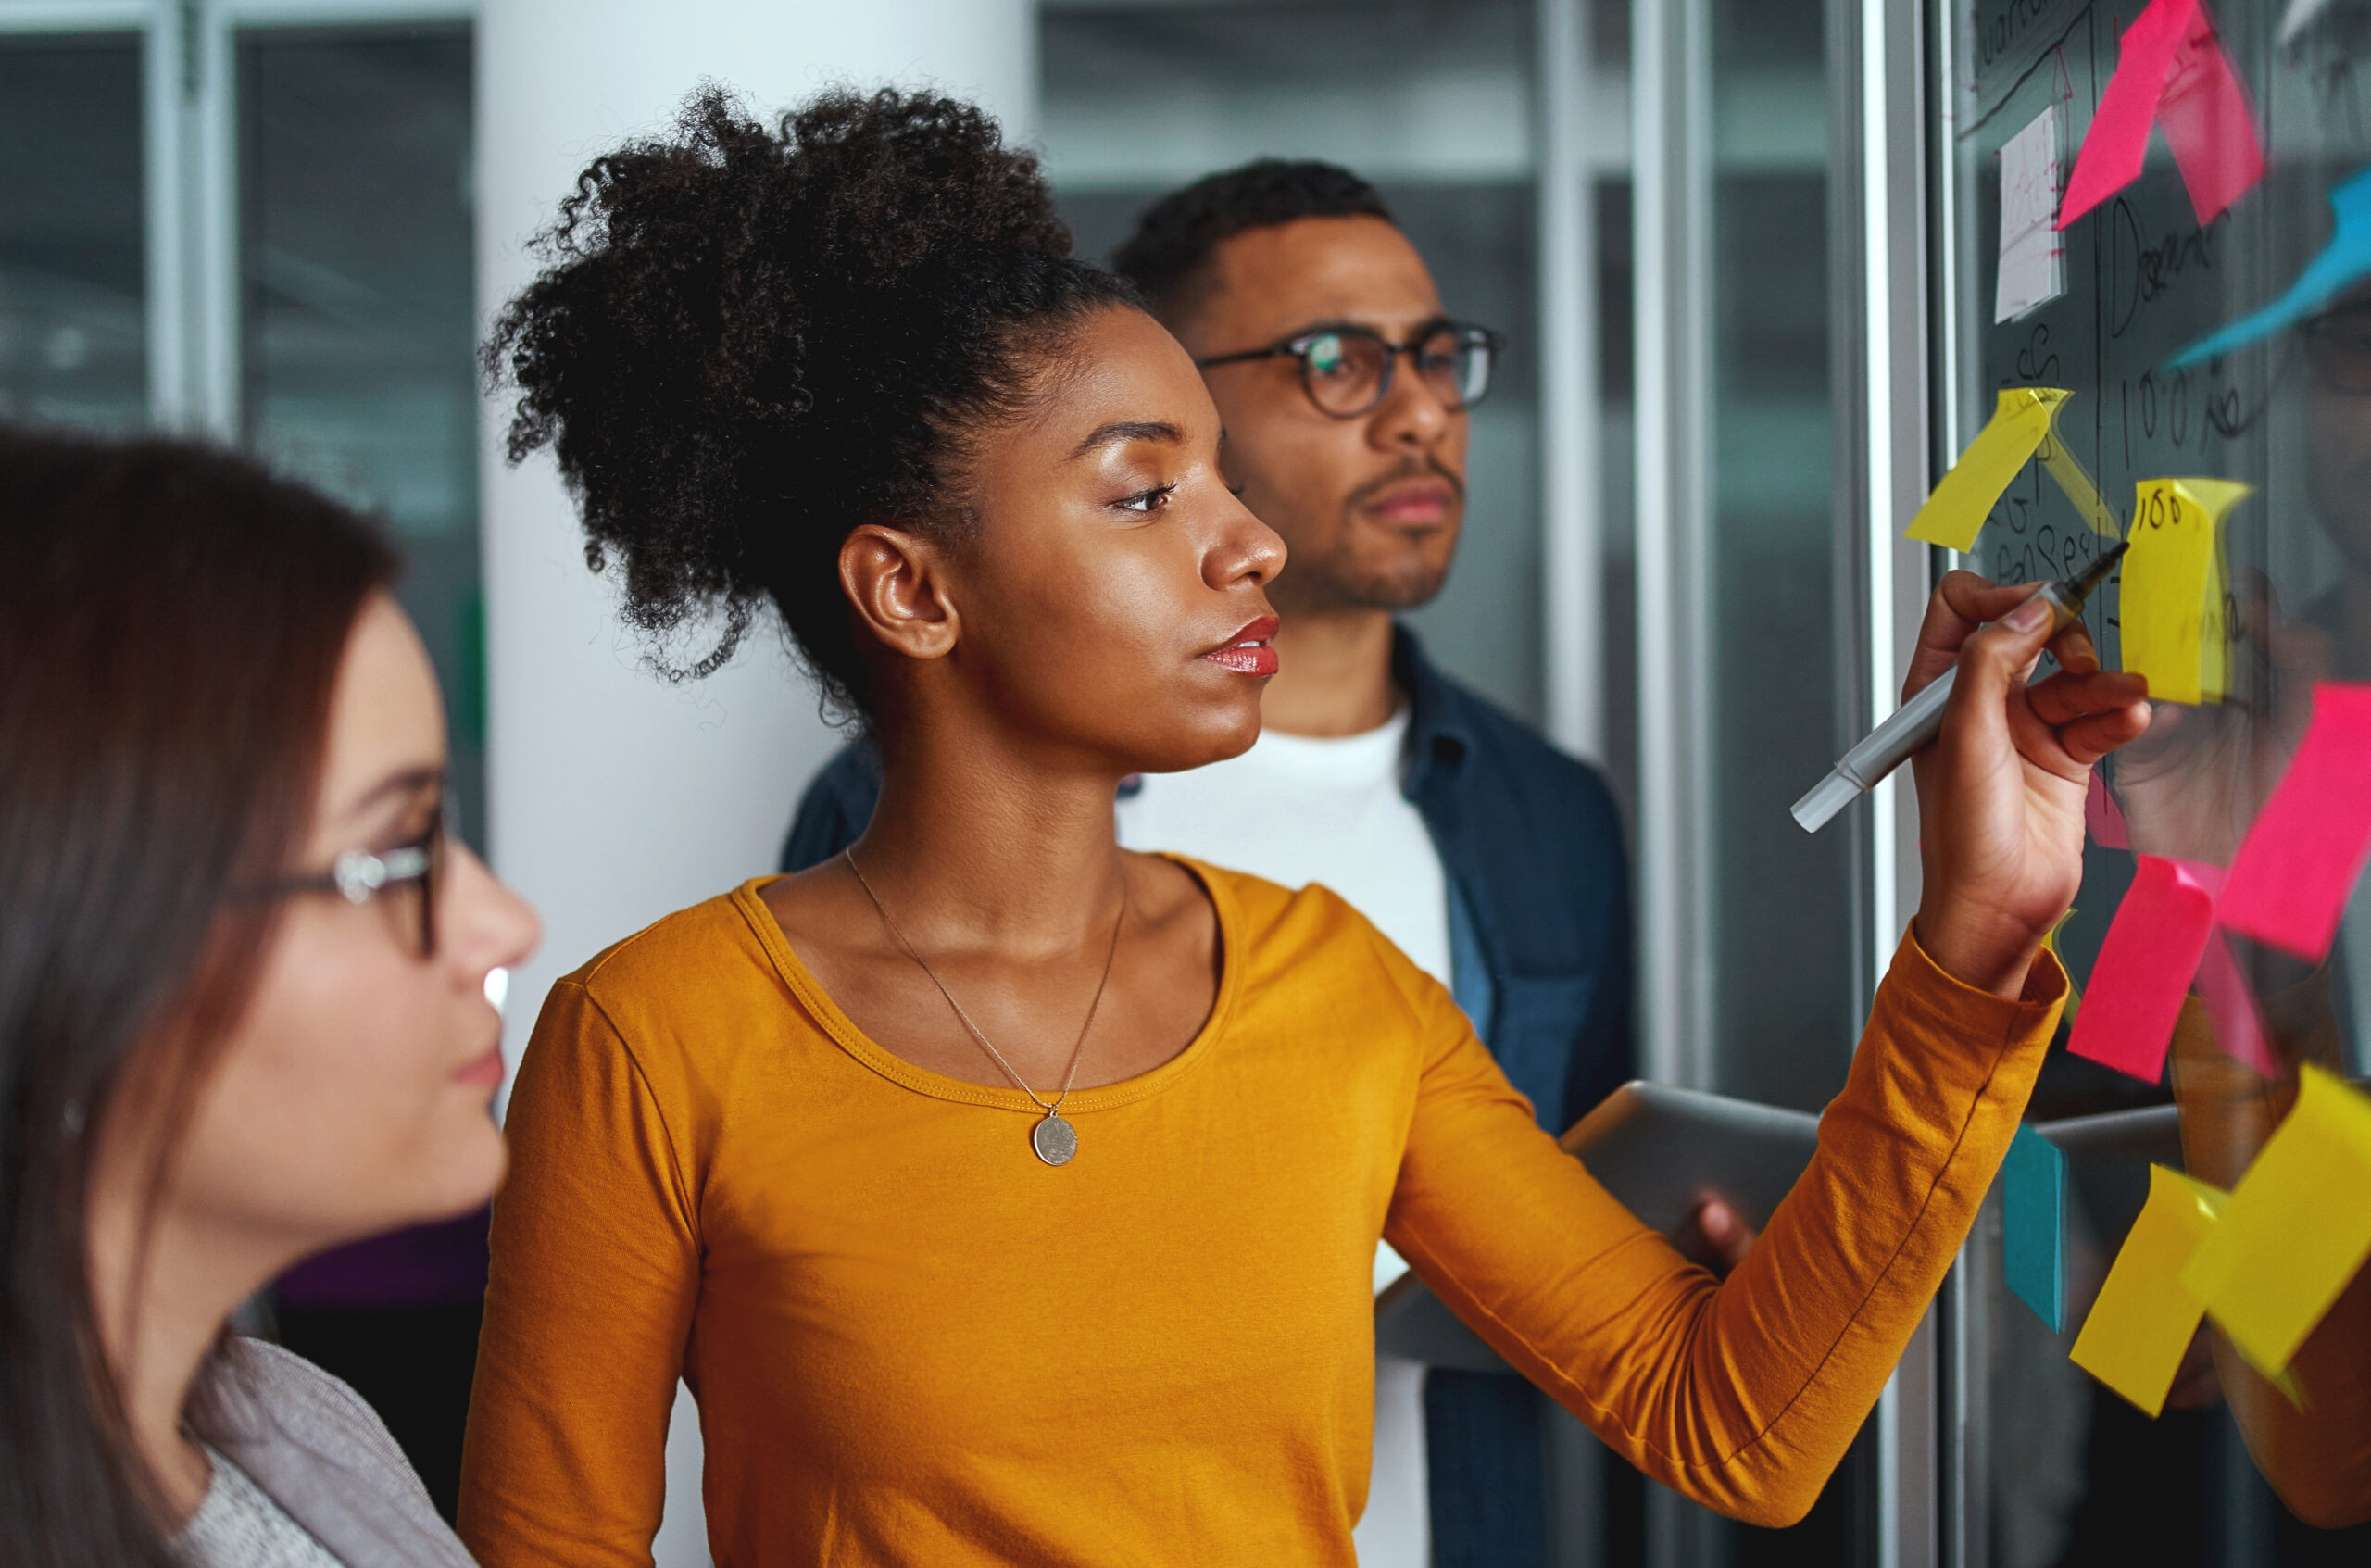 Young creative businesswoman standing with her colleagues writing new ideas on sticky notes over glass wall. The three represent minority or underrepresented populations in technology entrepreneurship.